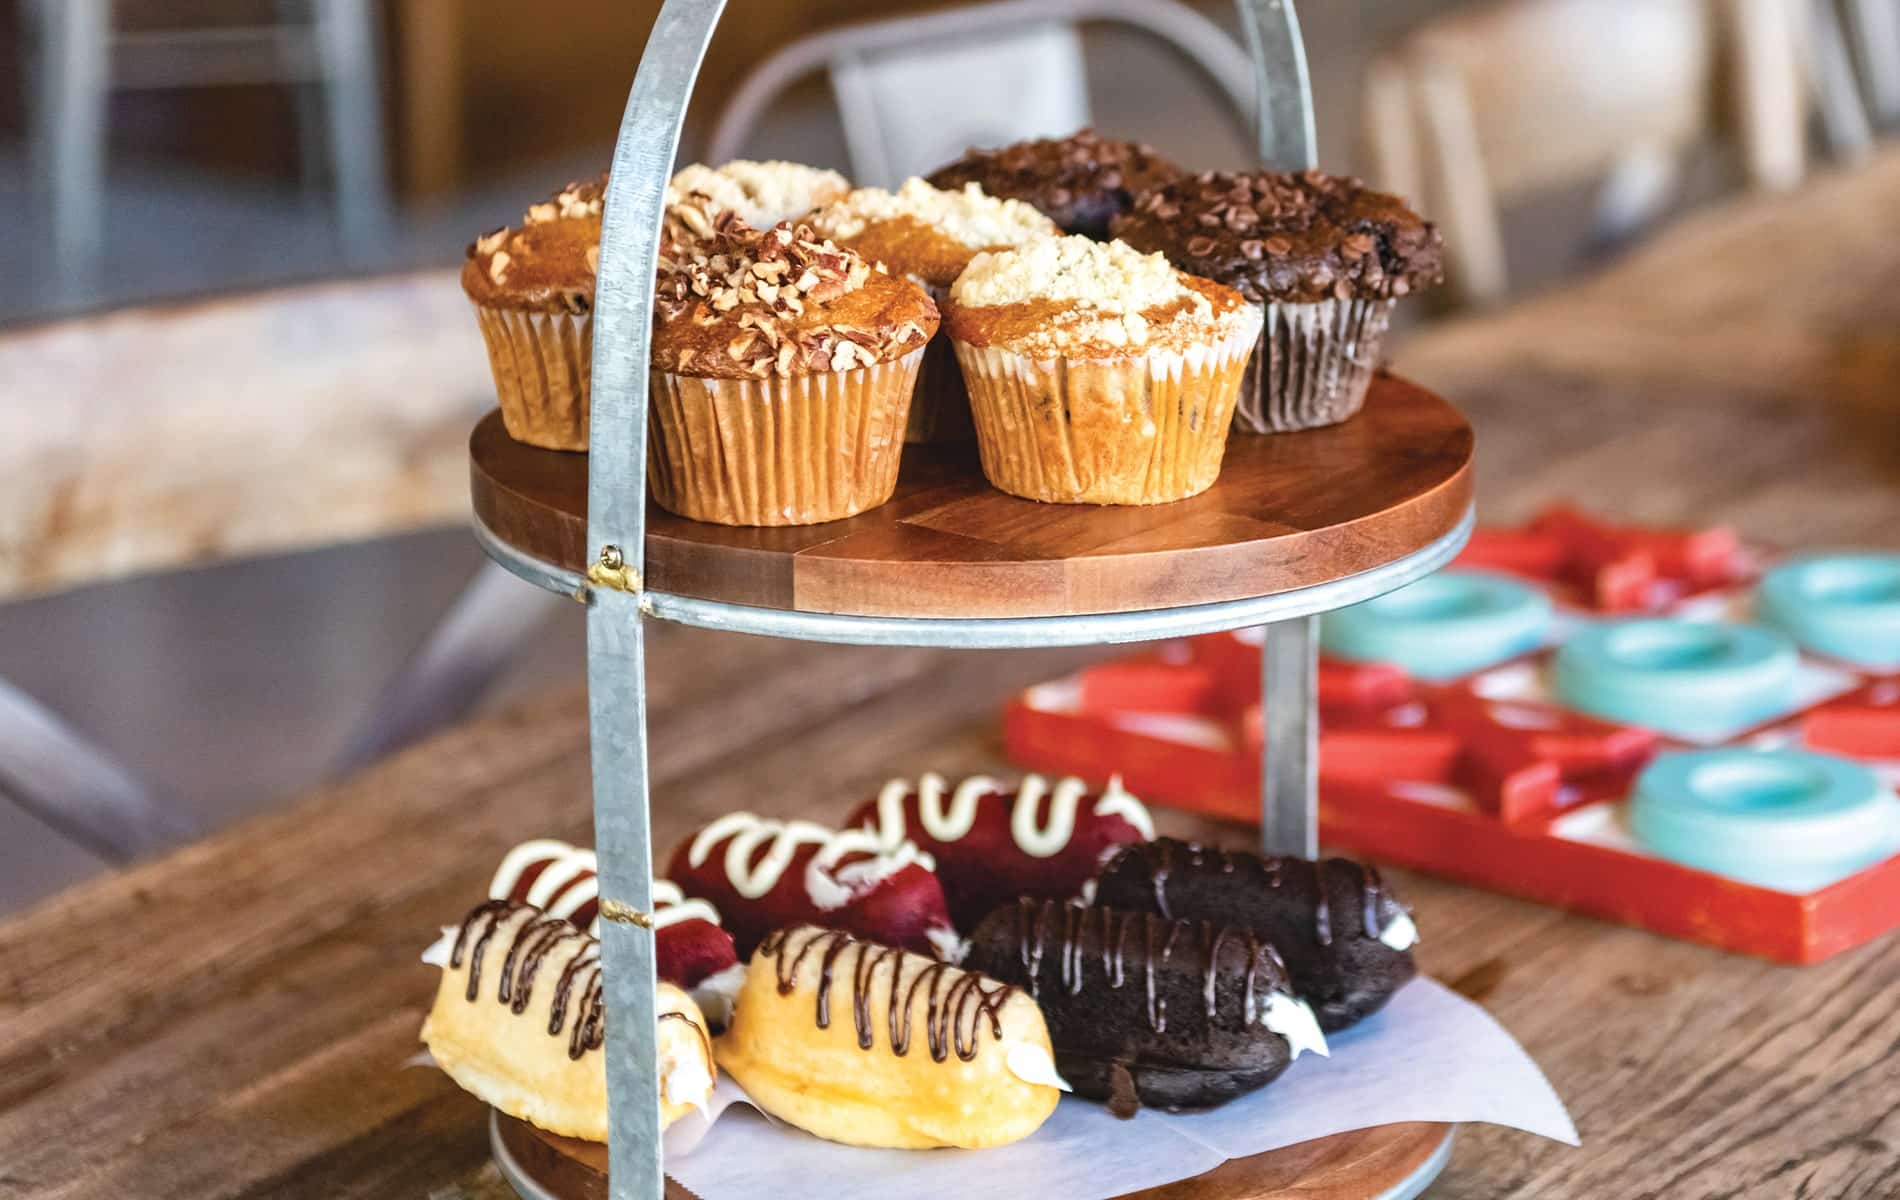 Decadent Coffee and Dessert Bar is a community café concept by Buttercream Dreams Hospitality Group, the team behind global cupcake phenomenon Smallcakes.